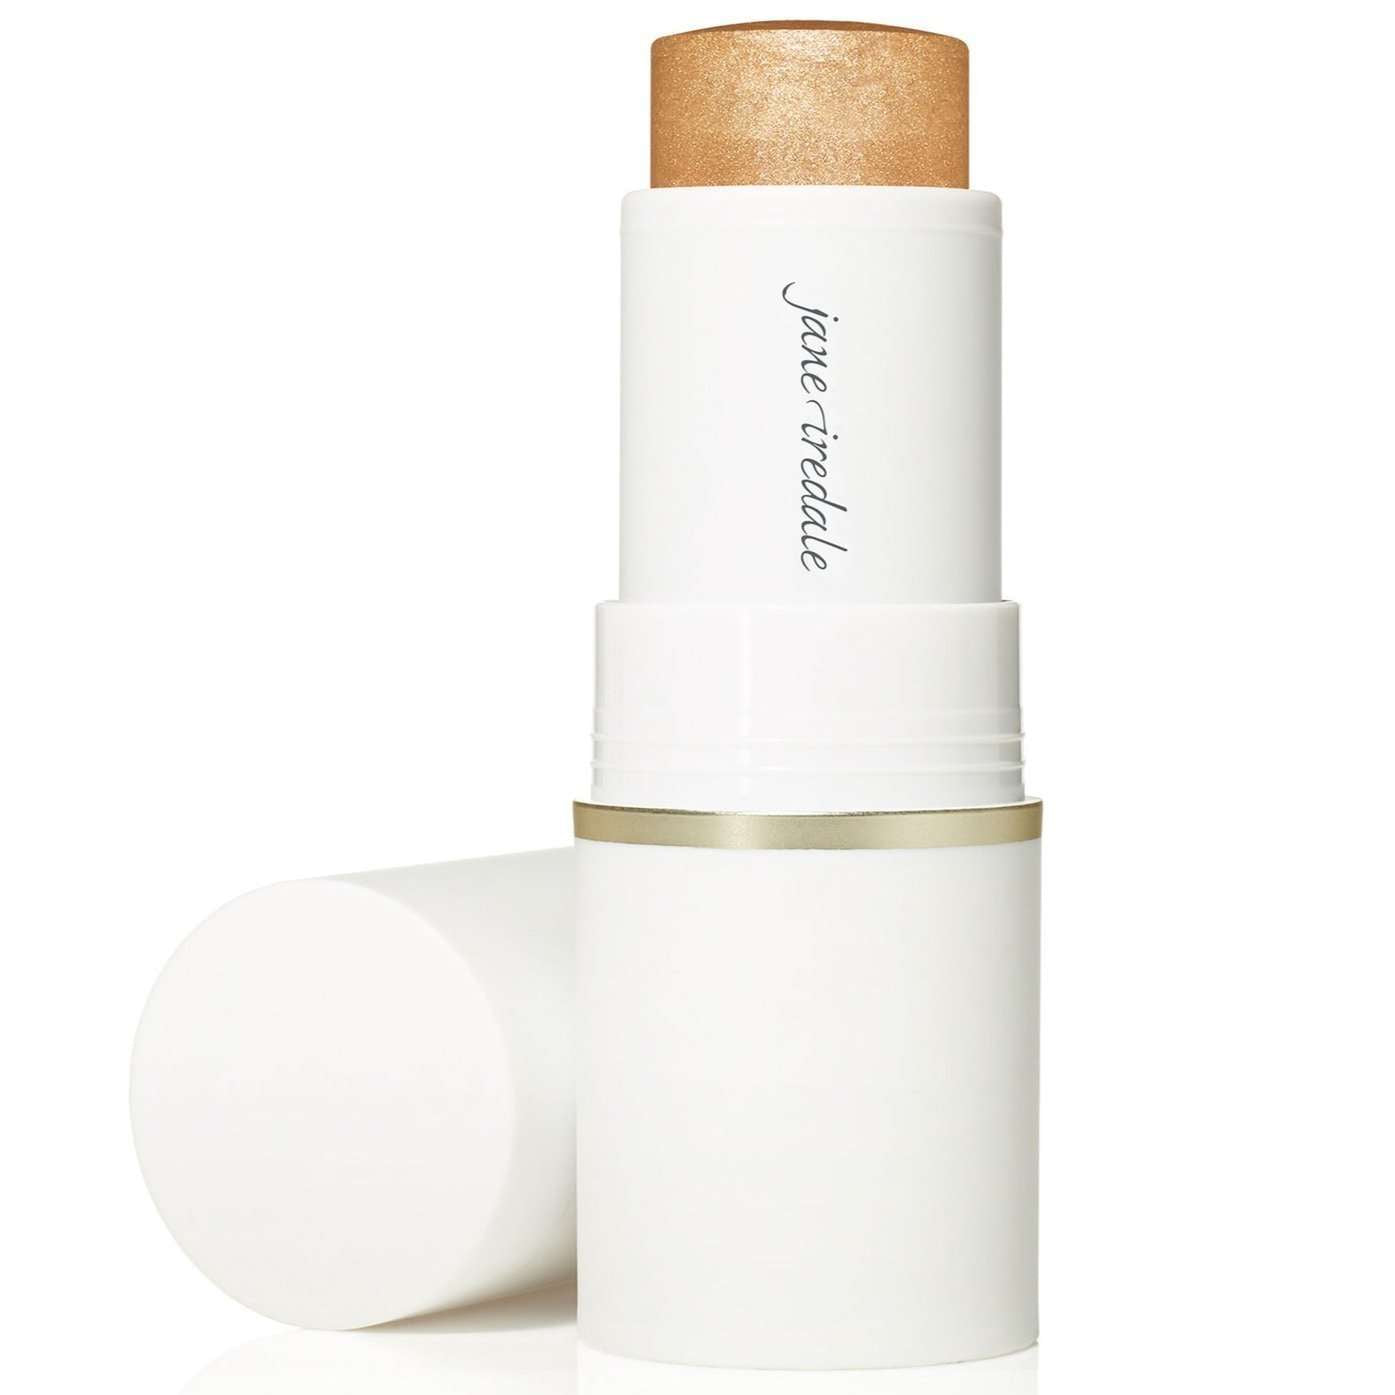 Jane Iredale Glow Time™ Highlighter Stick, Eclipse Highlighter